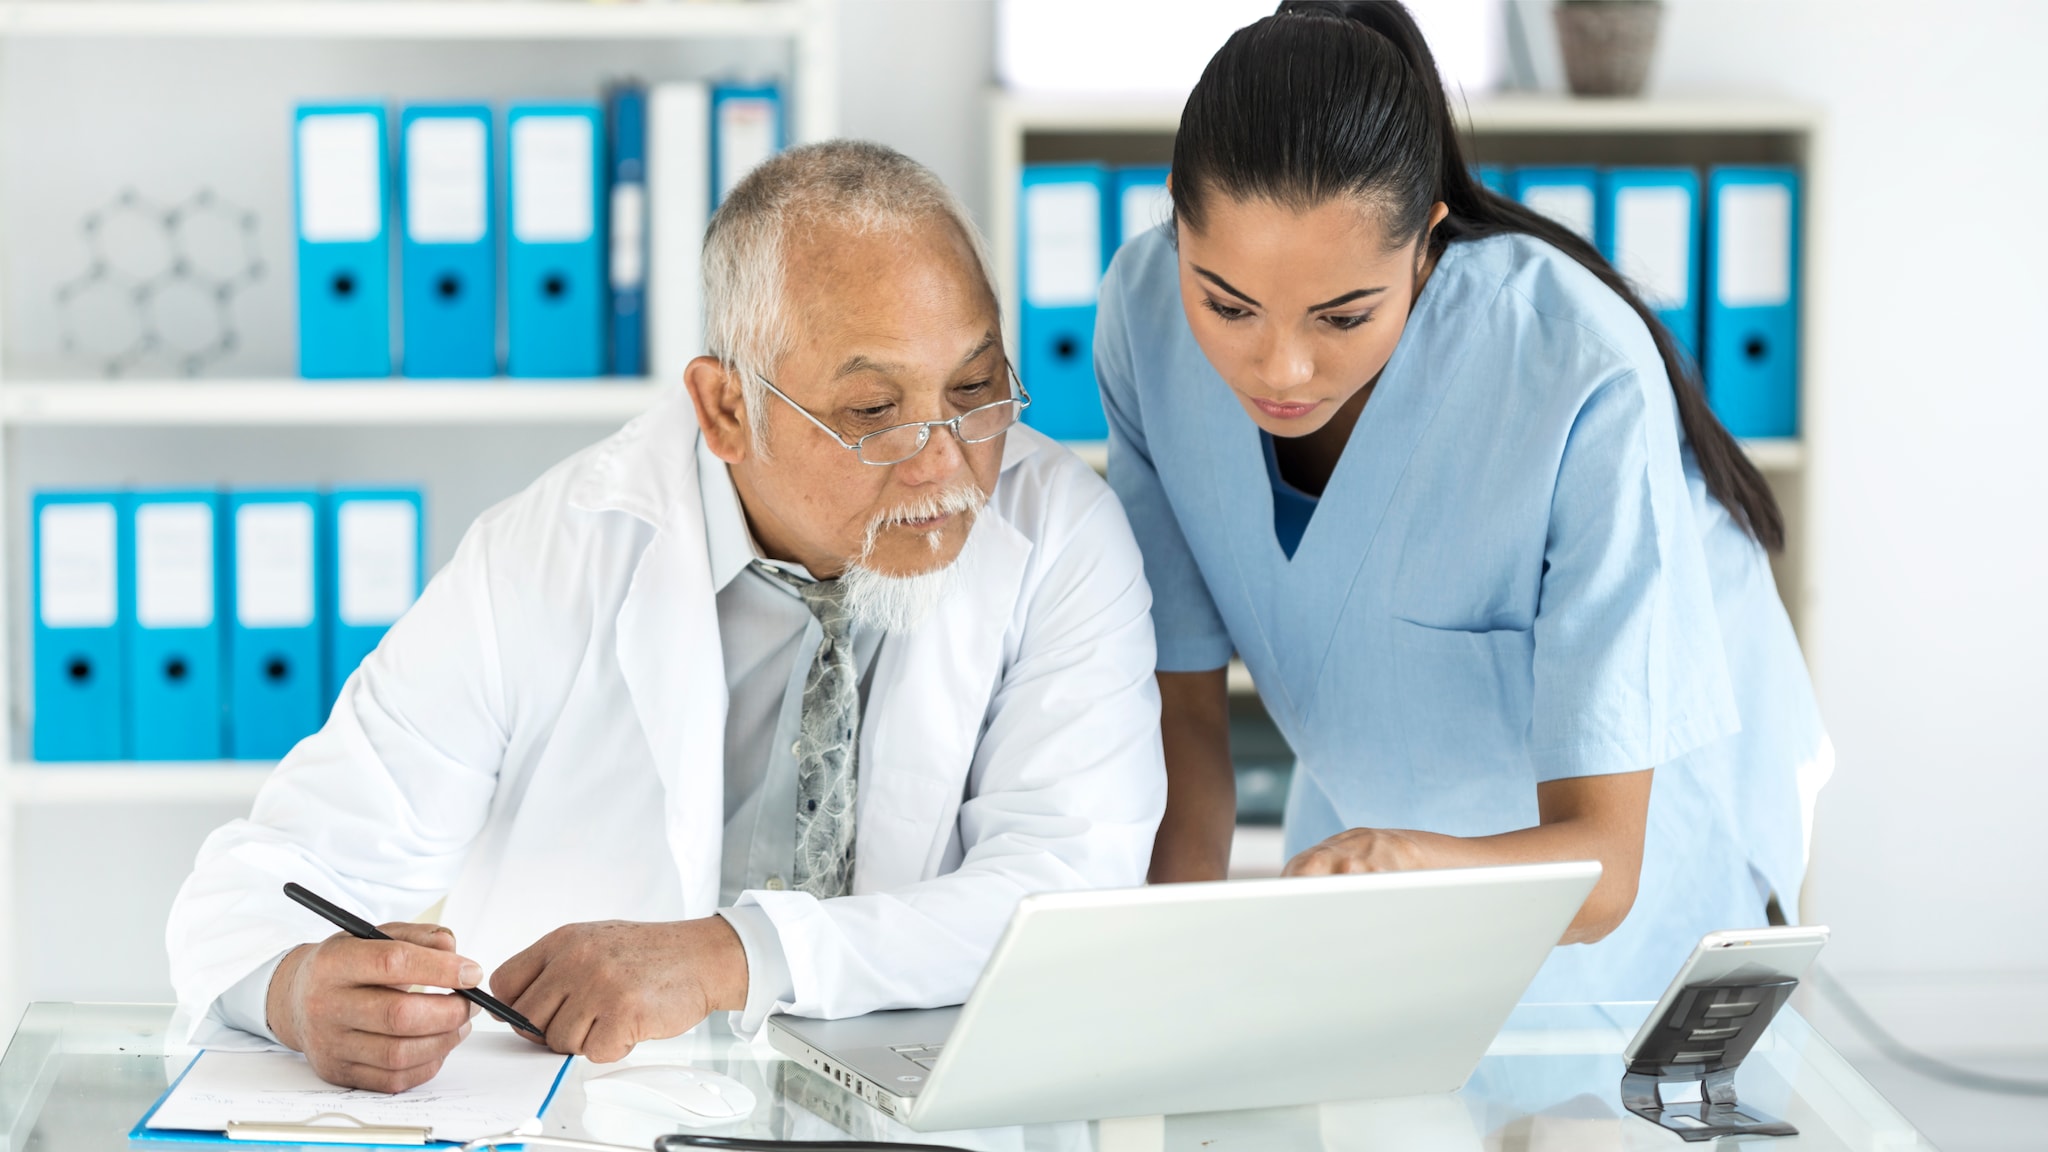 A picture of an older man and a younger woman, both in clinical setting clothing, looking at a laptop computer.